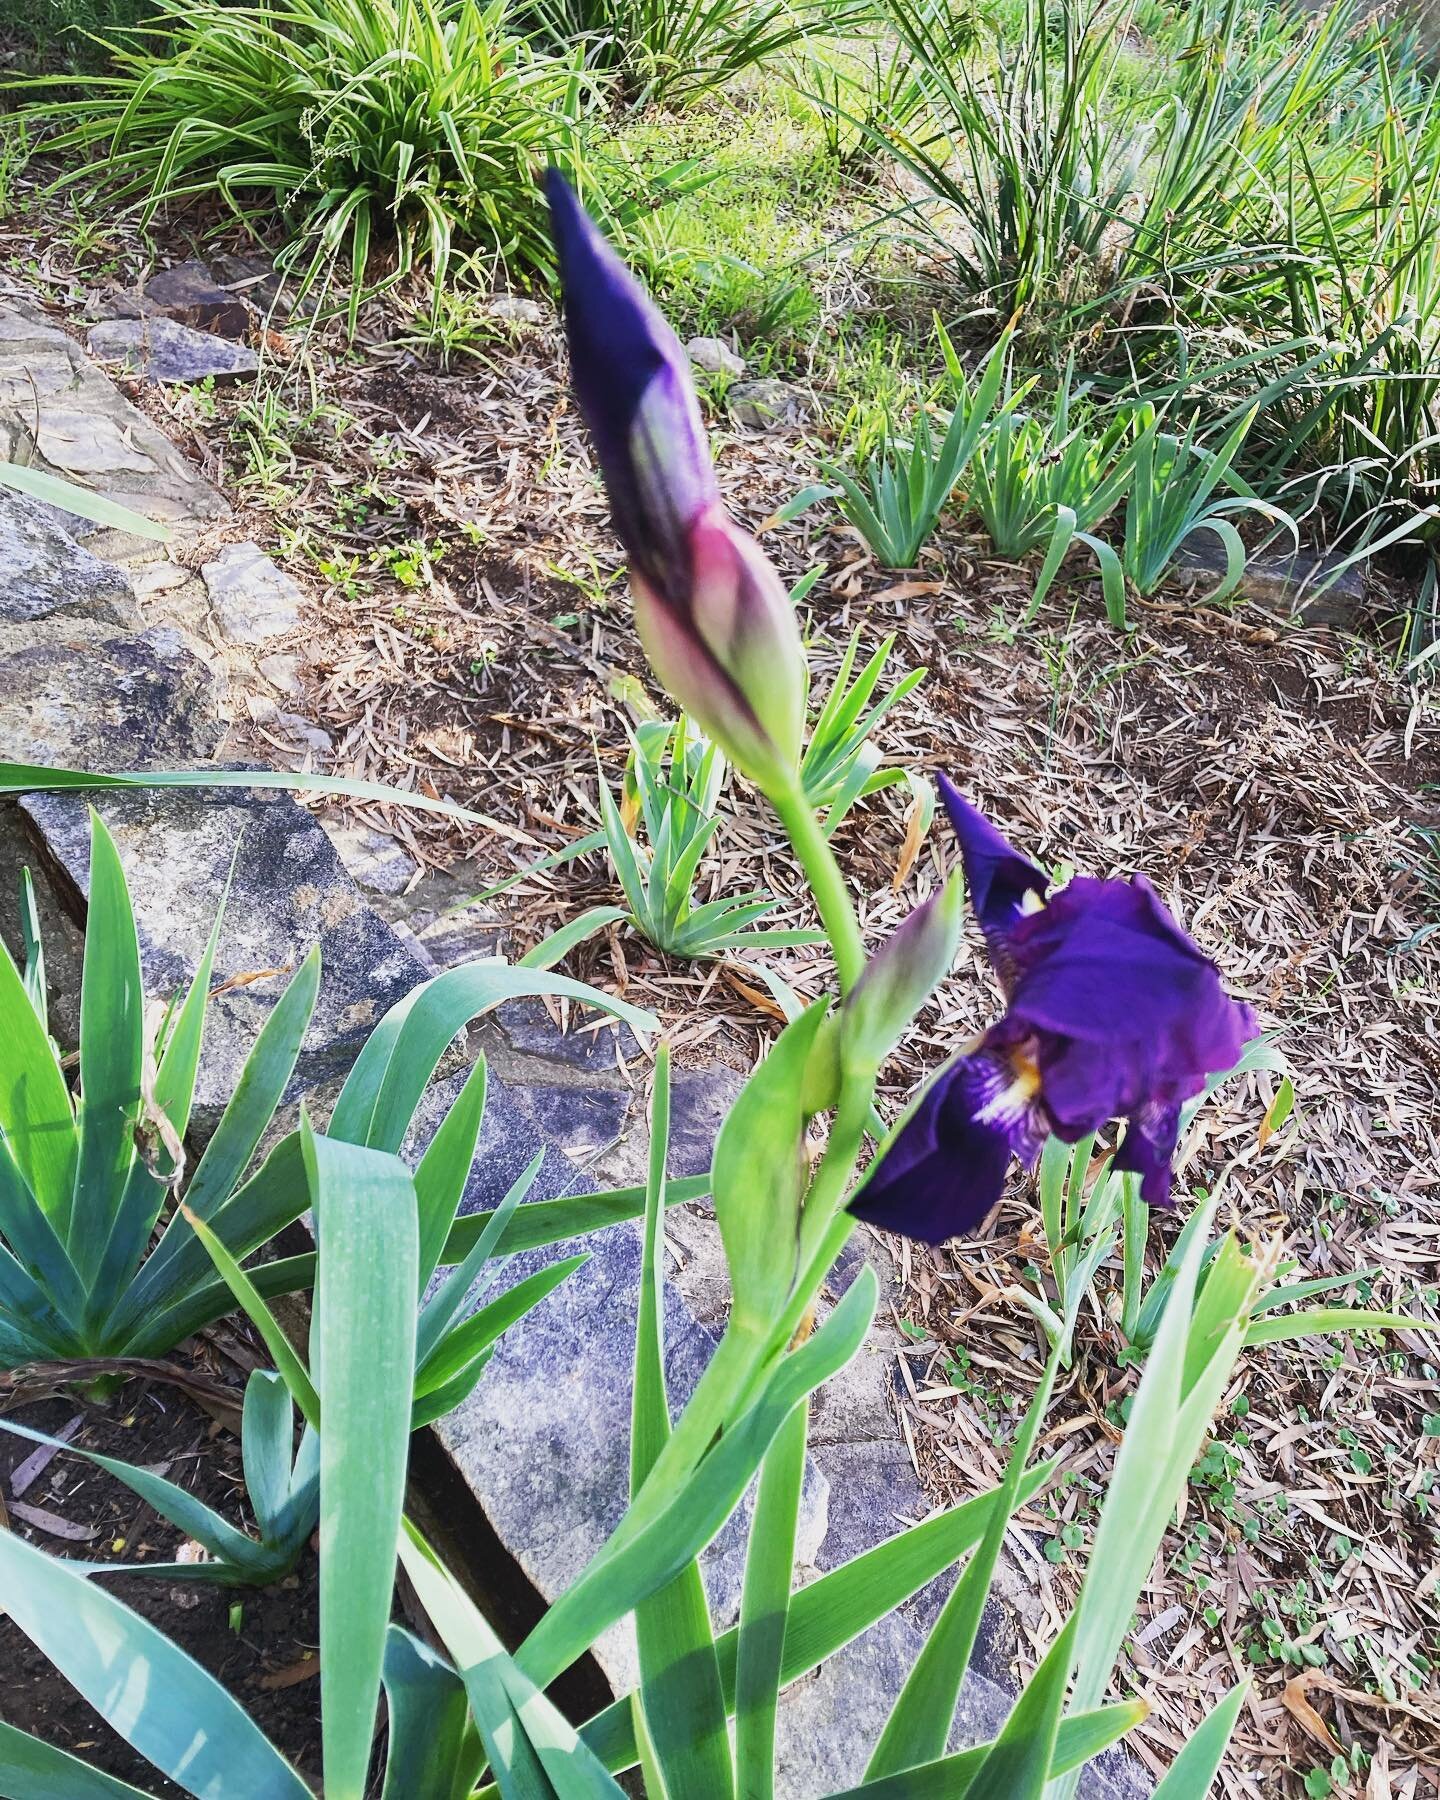 A spot of colour emerging from my garden in between the early winter showers.
 

#gardeningadventures #iris #purpleiris #southernhemisphere #southernhemispherewitches #australianwitch #wintermagic #antipodeanwitch #adelaide